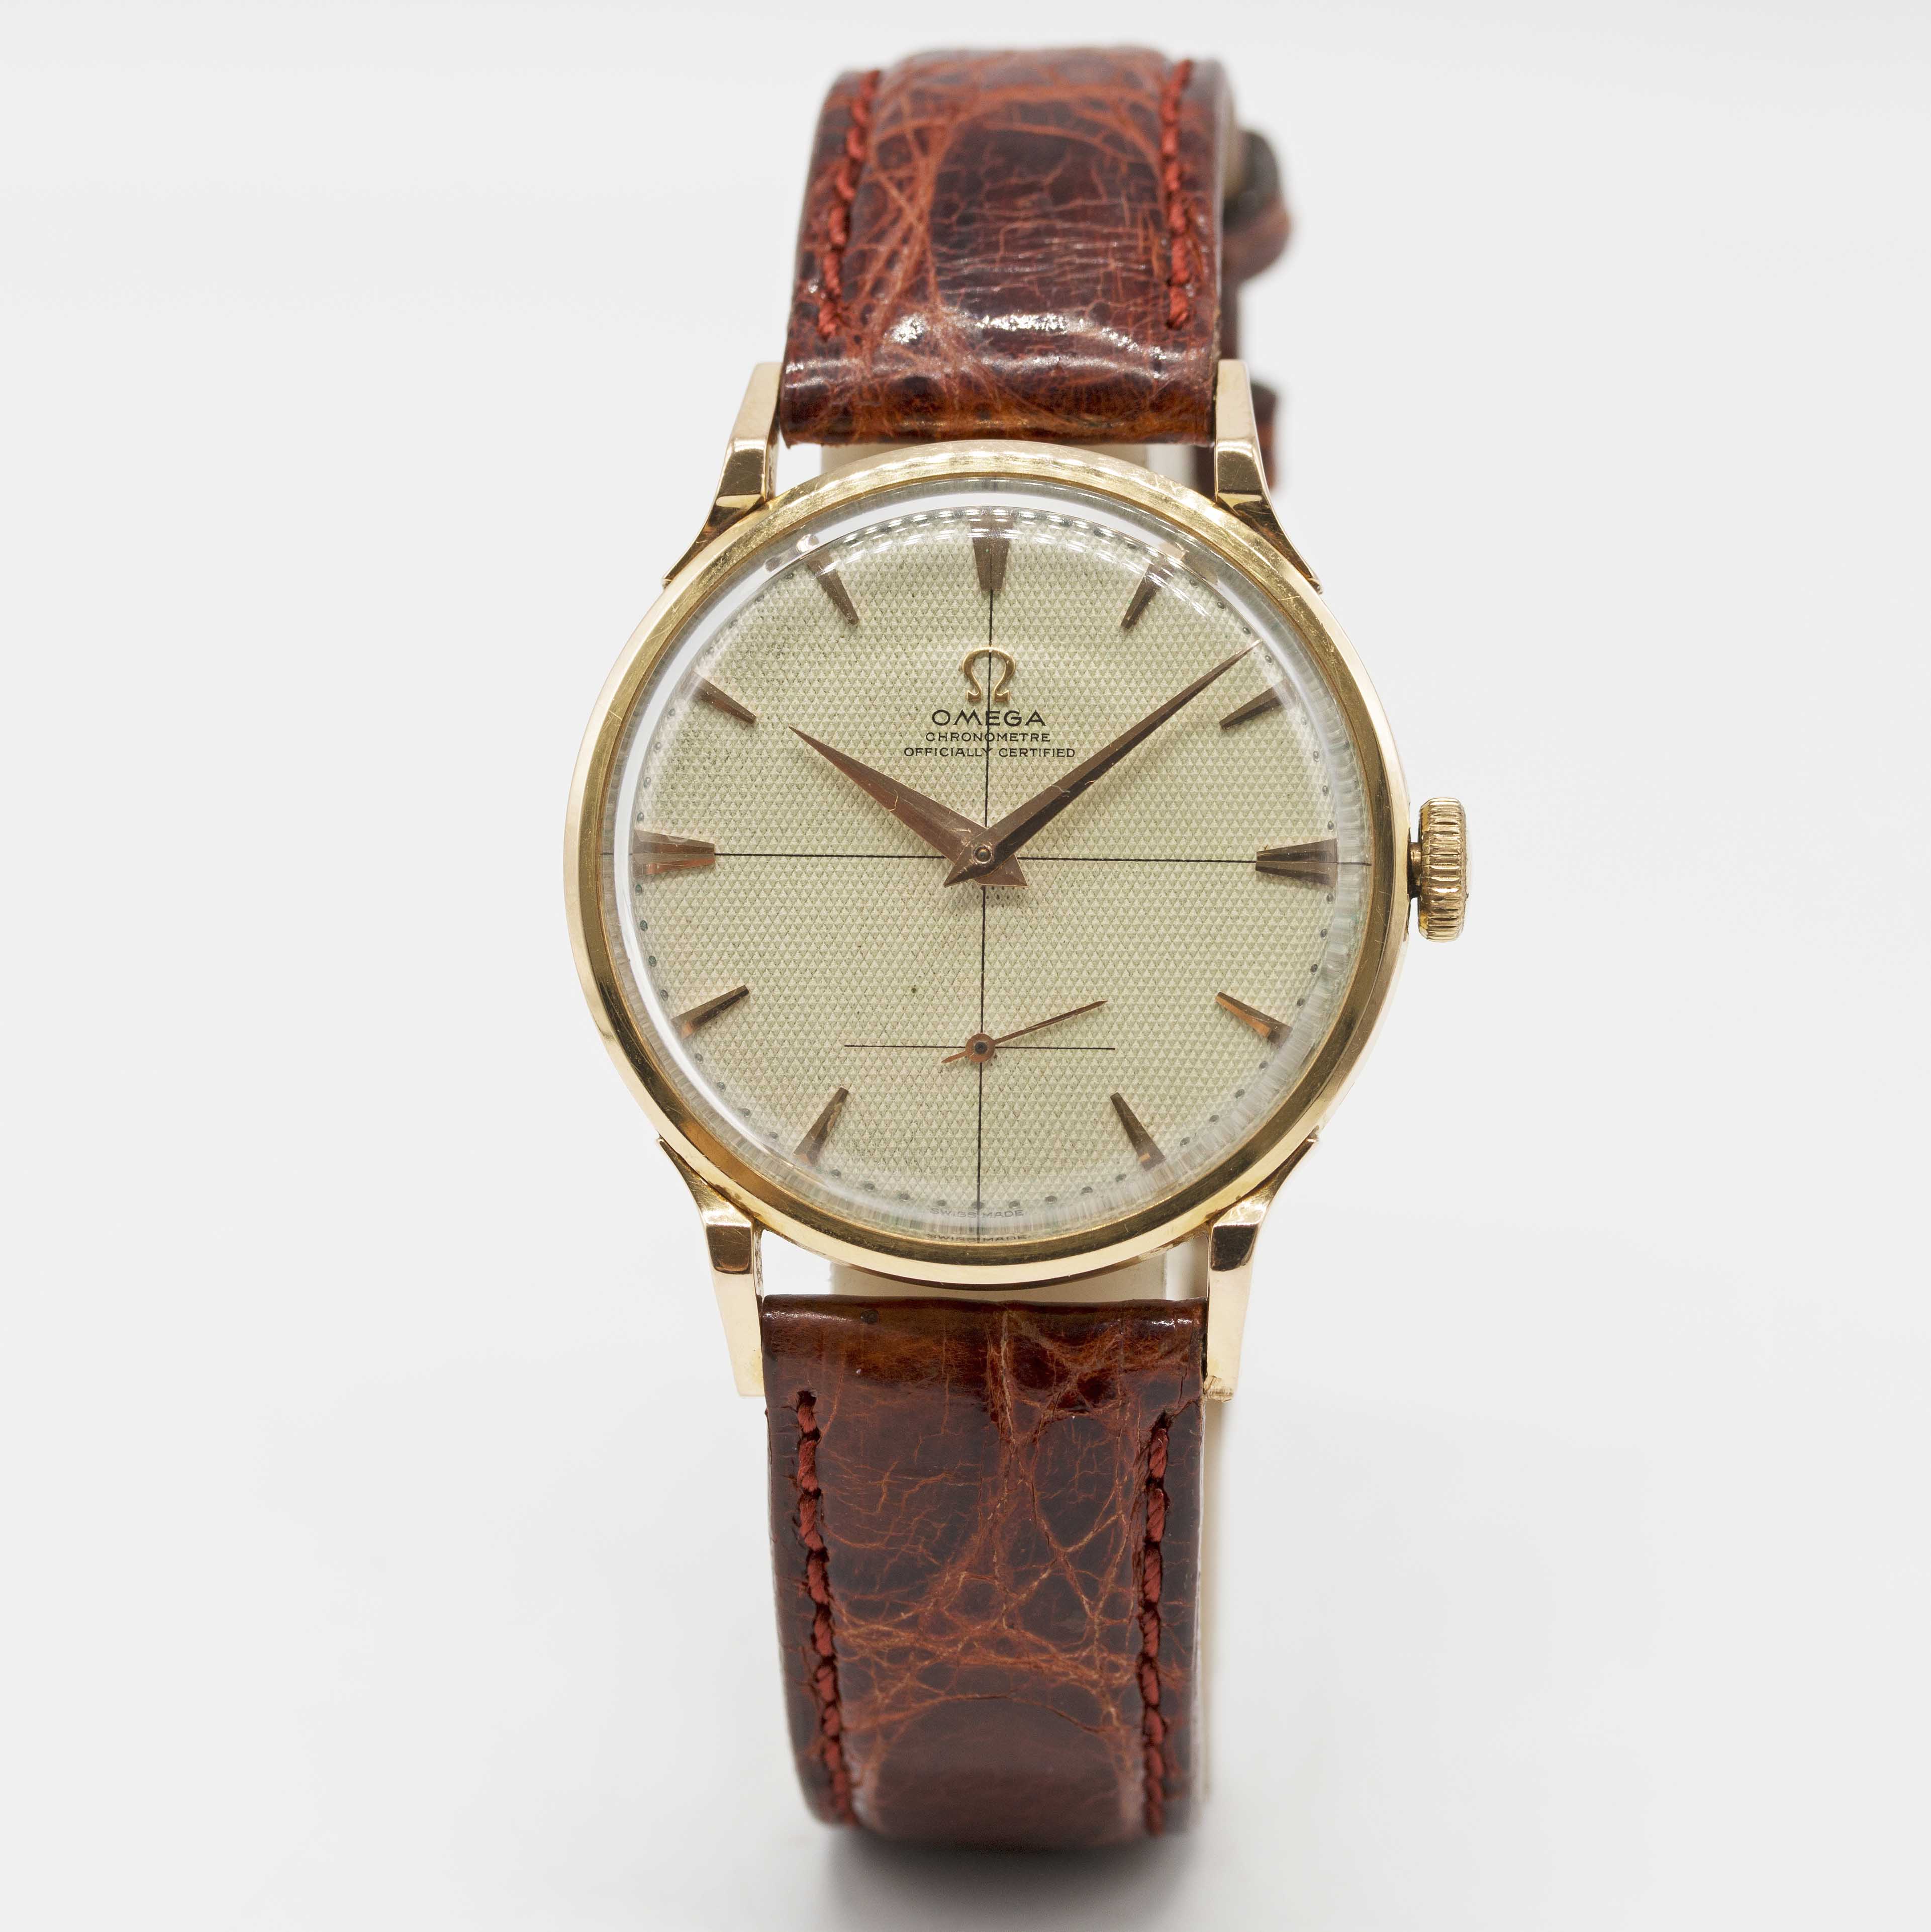 A RARE GENTLEMAN'S 18K SOLID ROSE GOLD OMEGA CHRONOMETRE OFFICIALLY CERTIFIED WRIST WATCH CIRCA - Image 3 of 10